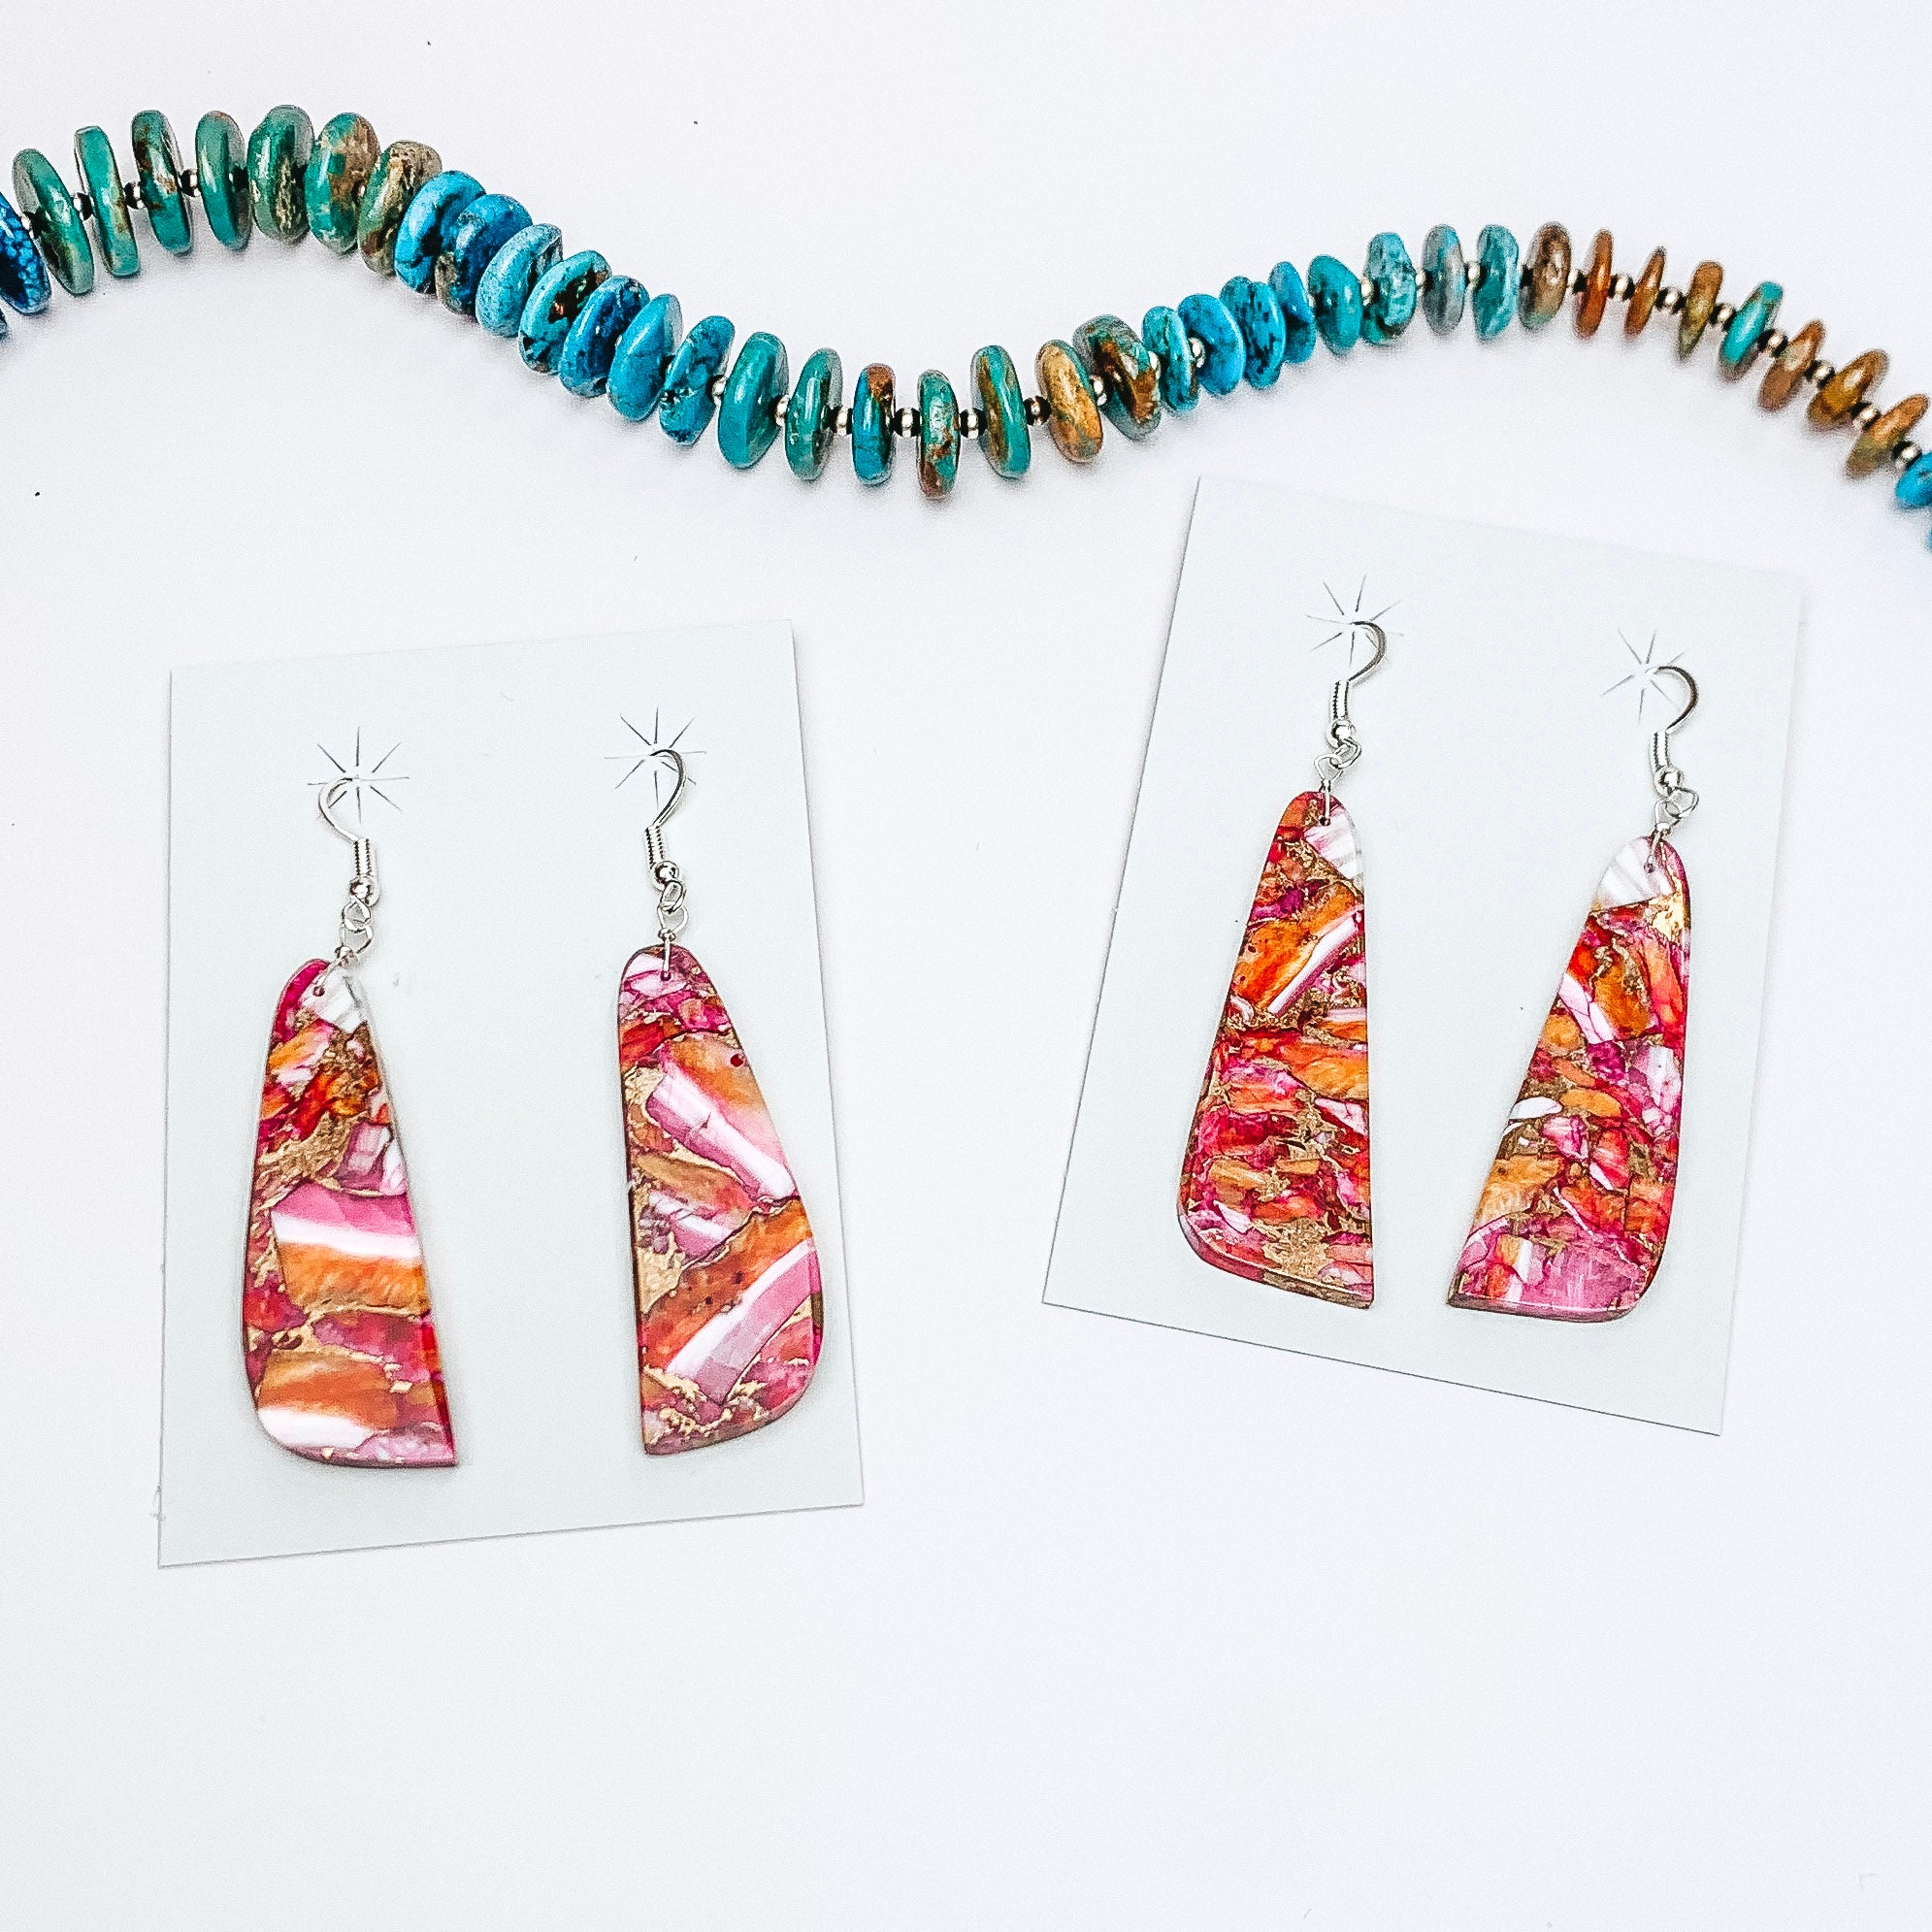 Centered in the picture is pink dhalia mix slab earrings. A turquoise necklace is set above the earrings. All on a white background.